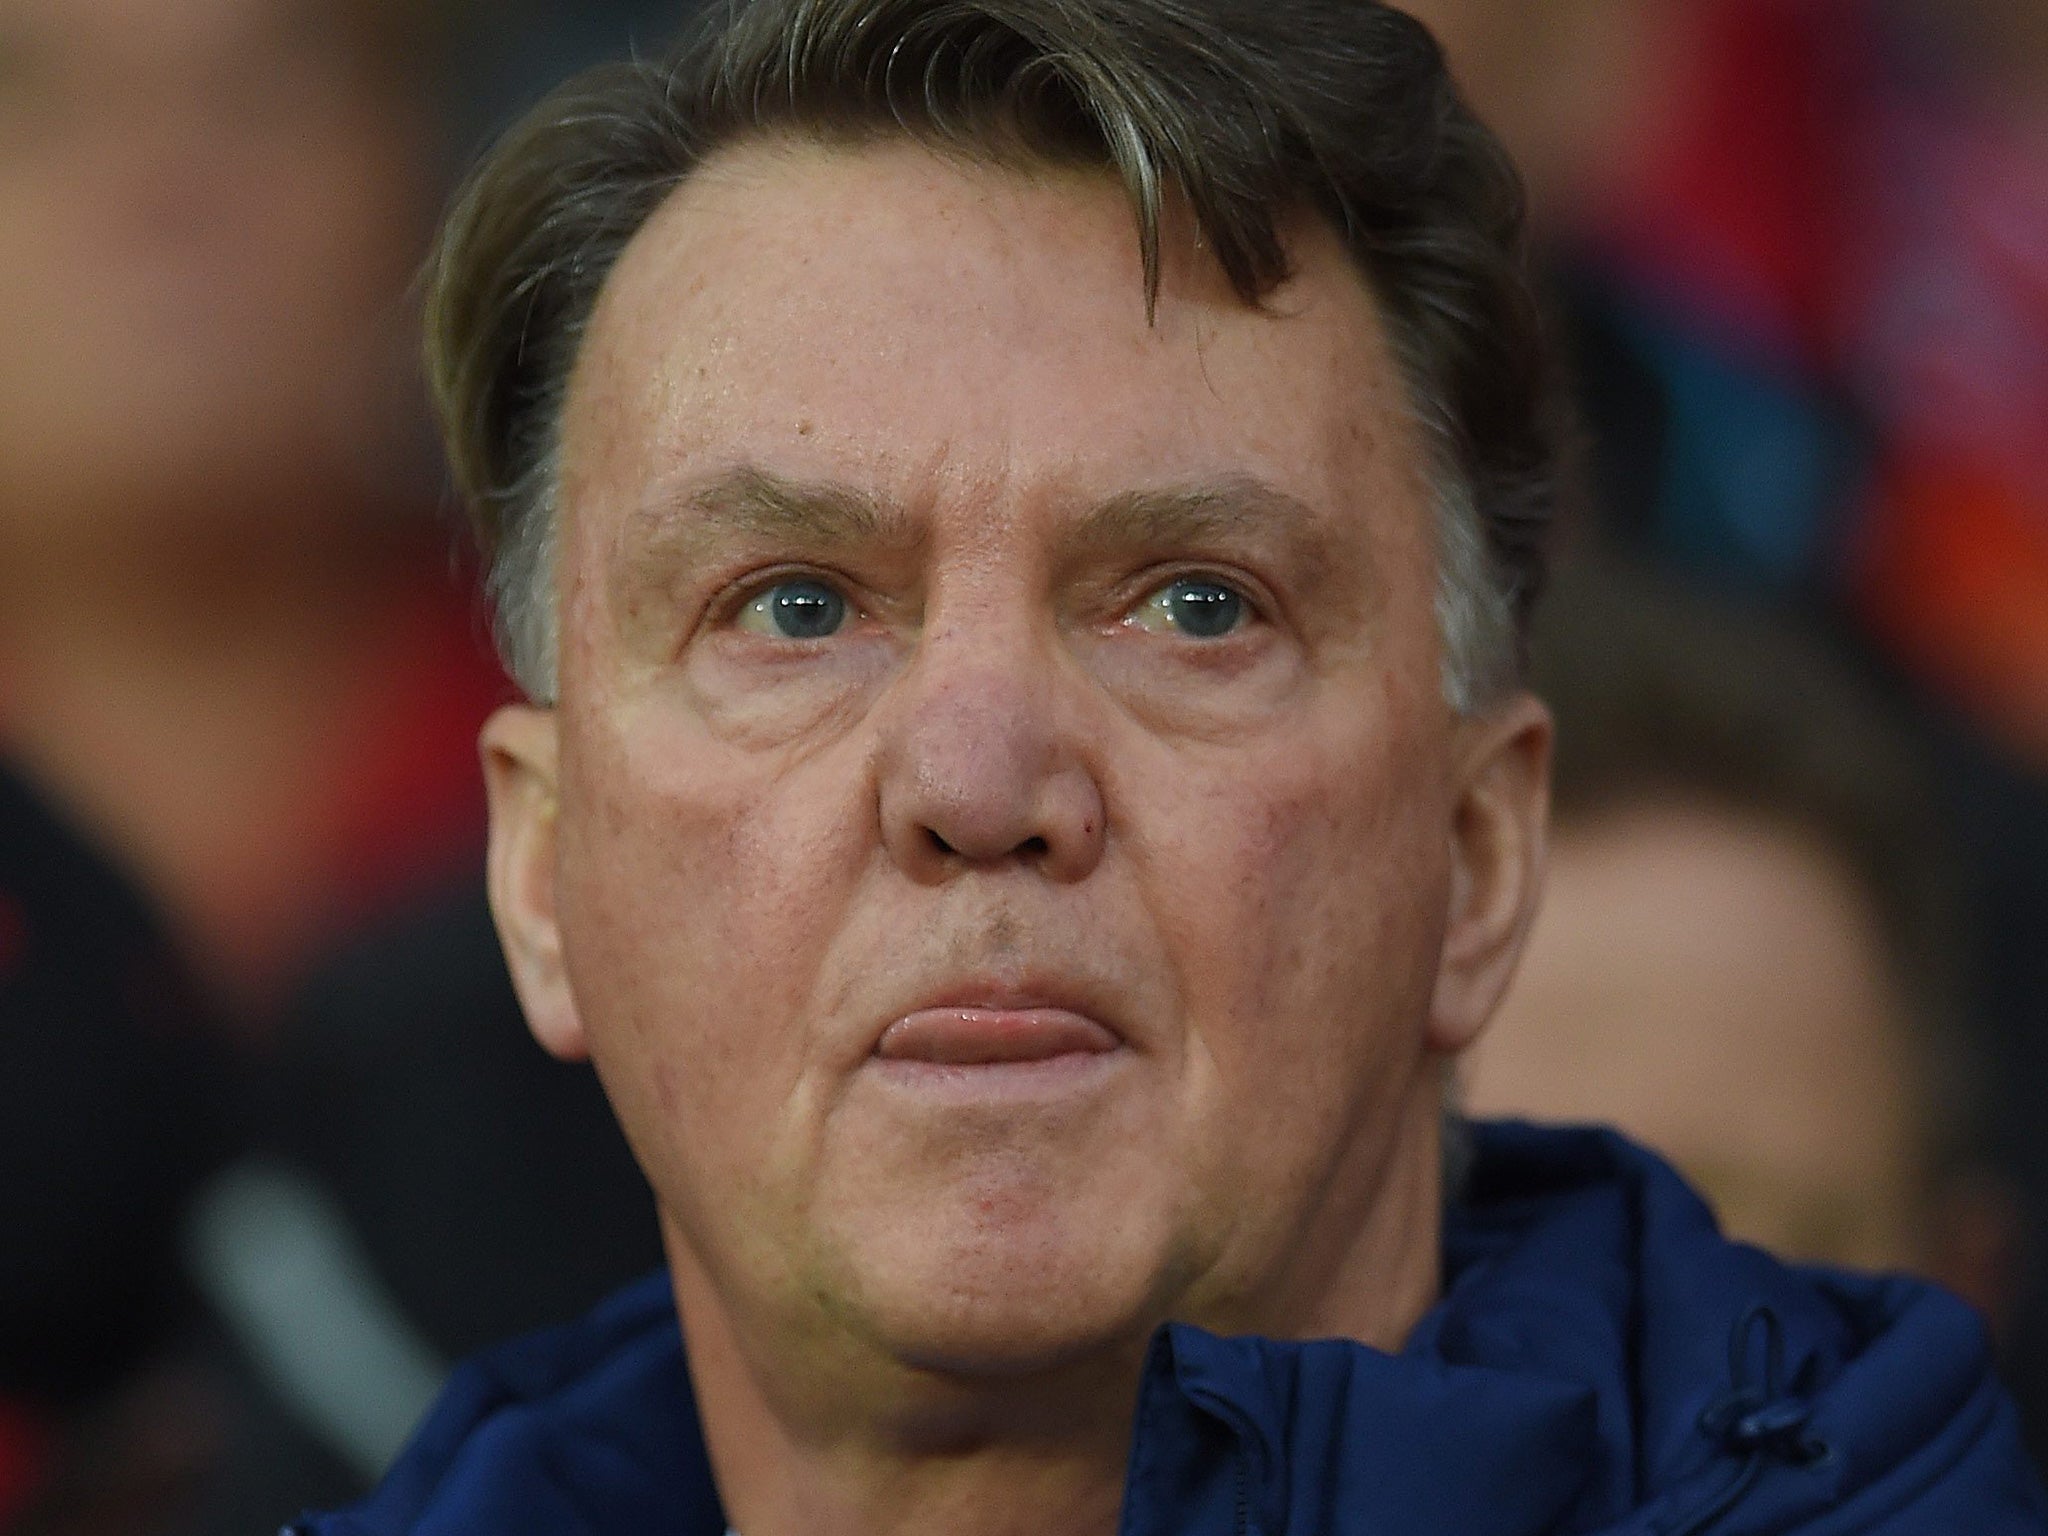 Manchester United's Louis van Gaal said he would quit football management at 55 – he is now 64